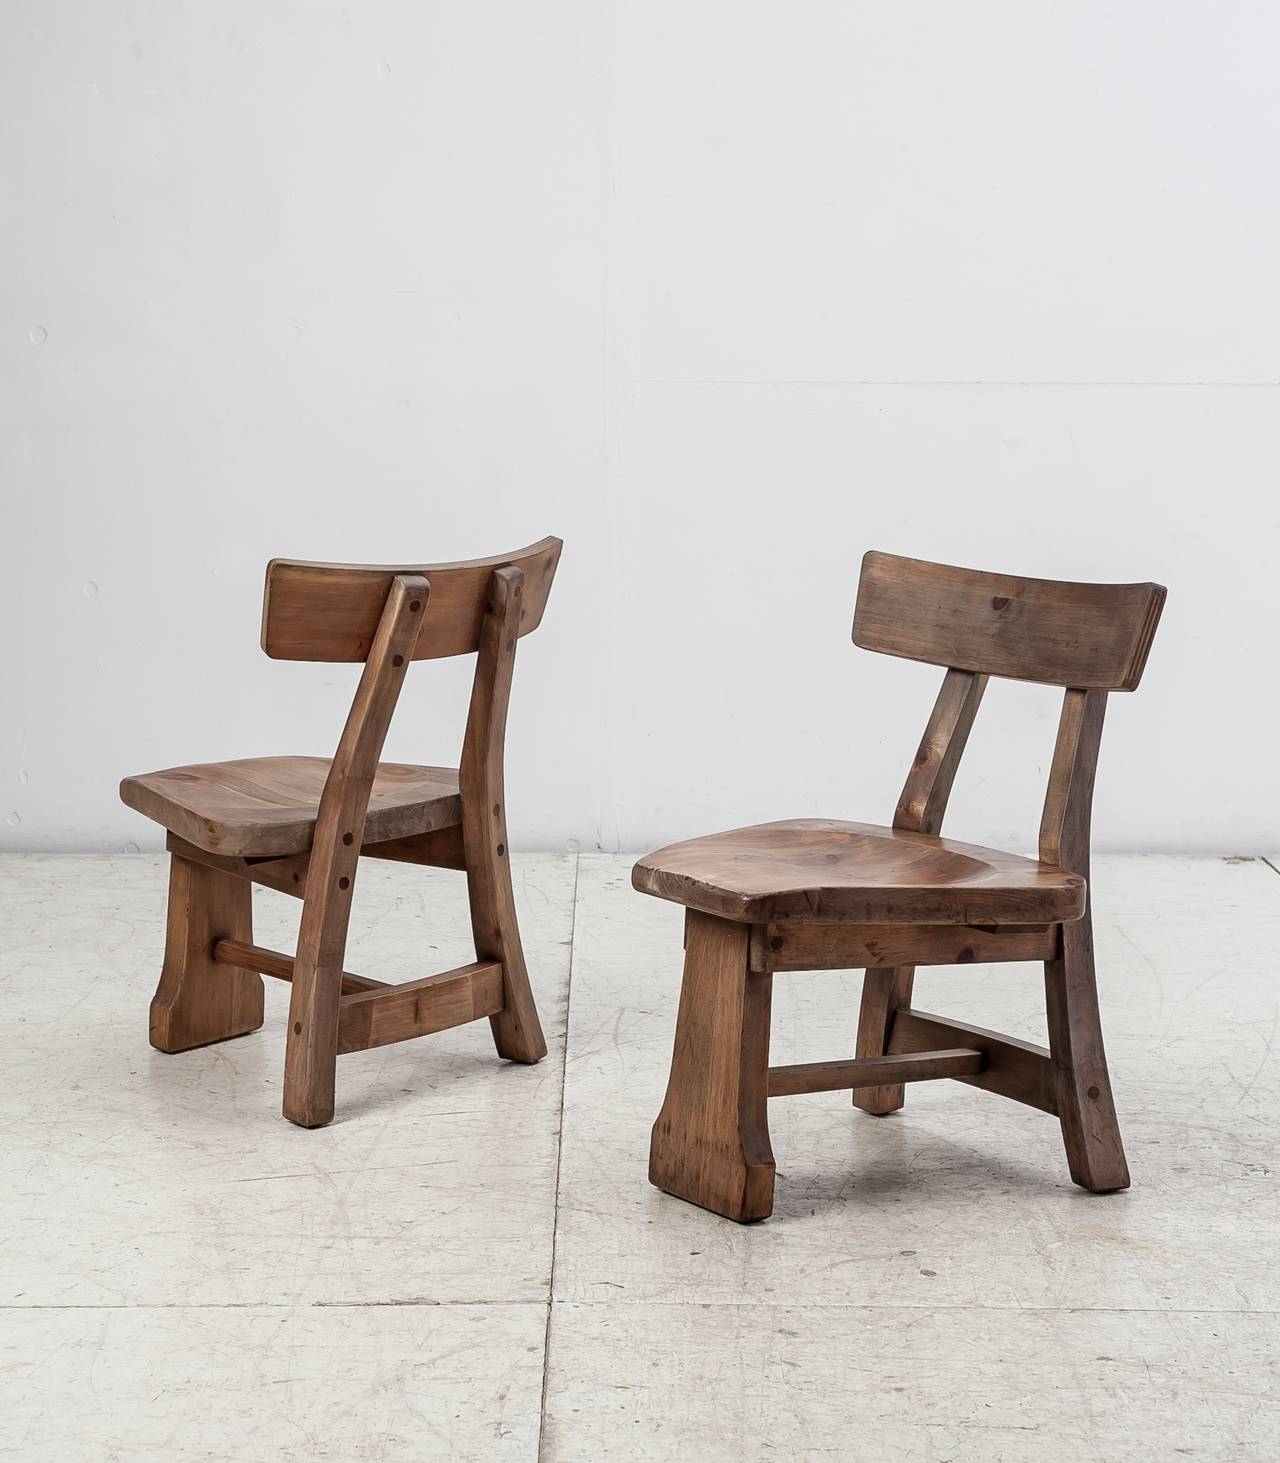 A pair of studio crafted chairs of knotty pine by Habitant Shops. The chairs are marked by Habitant Shops and are in a great vintage condition.